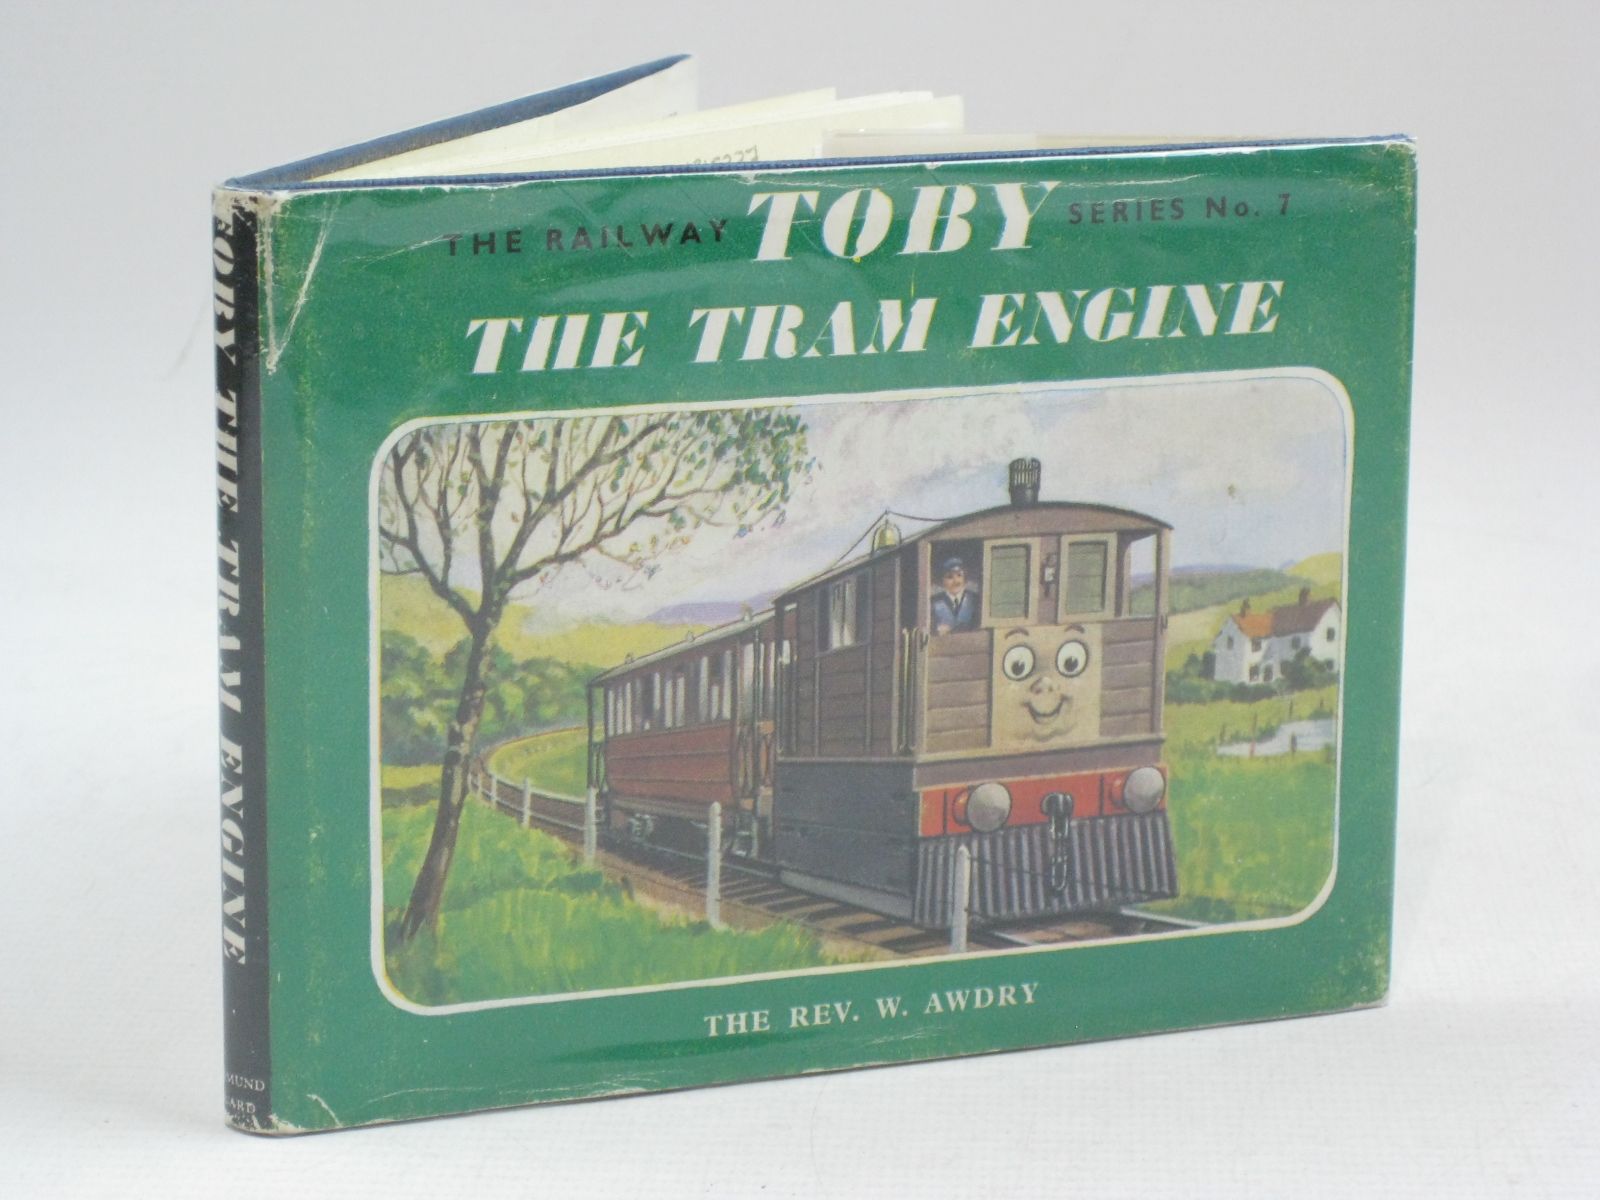 Photo of TOBY THE TRAM ENGINE written by Awdry, Rev. W. illustrated by Dalby, C. Reginald published by Edmund Ward Ltd. (STOCK CODE: 1315337)  for sale by Stella & Rose's Books